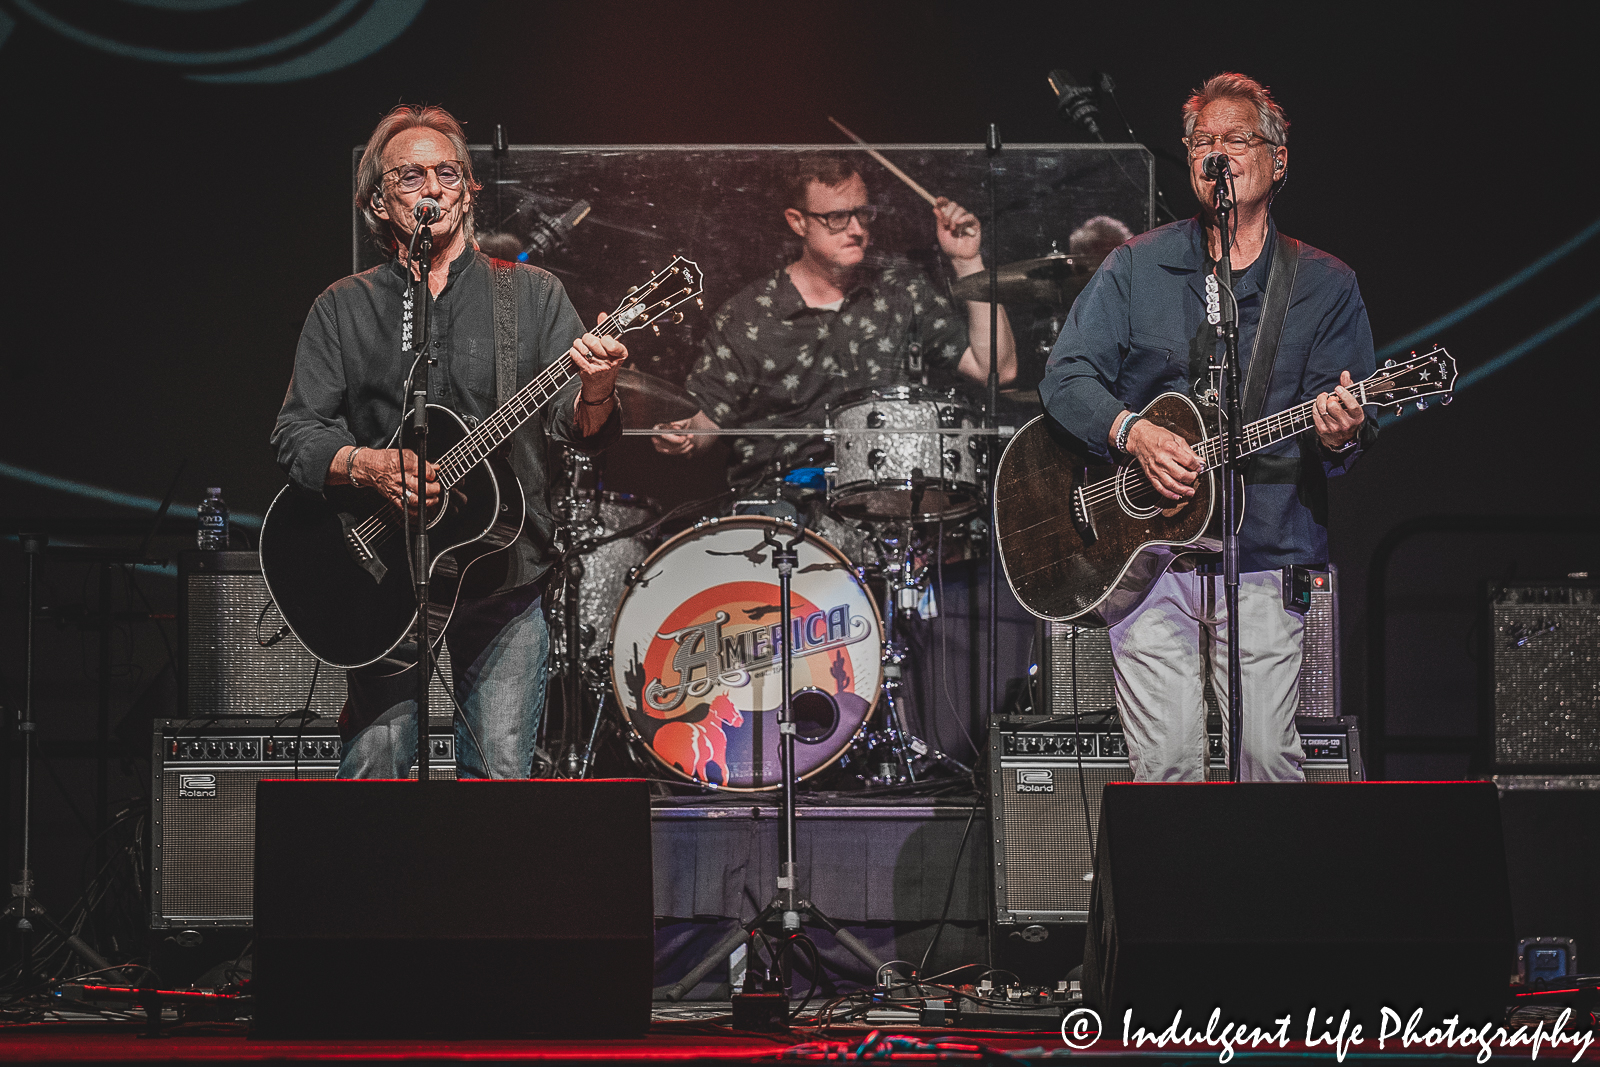 Dewey Bunnell and Gerry Beckley of folk rock band America performing live together at Star Pavilion inside of Ameristar Casino in Kansas City, MO on June 2, 2023.